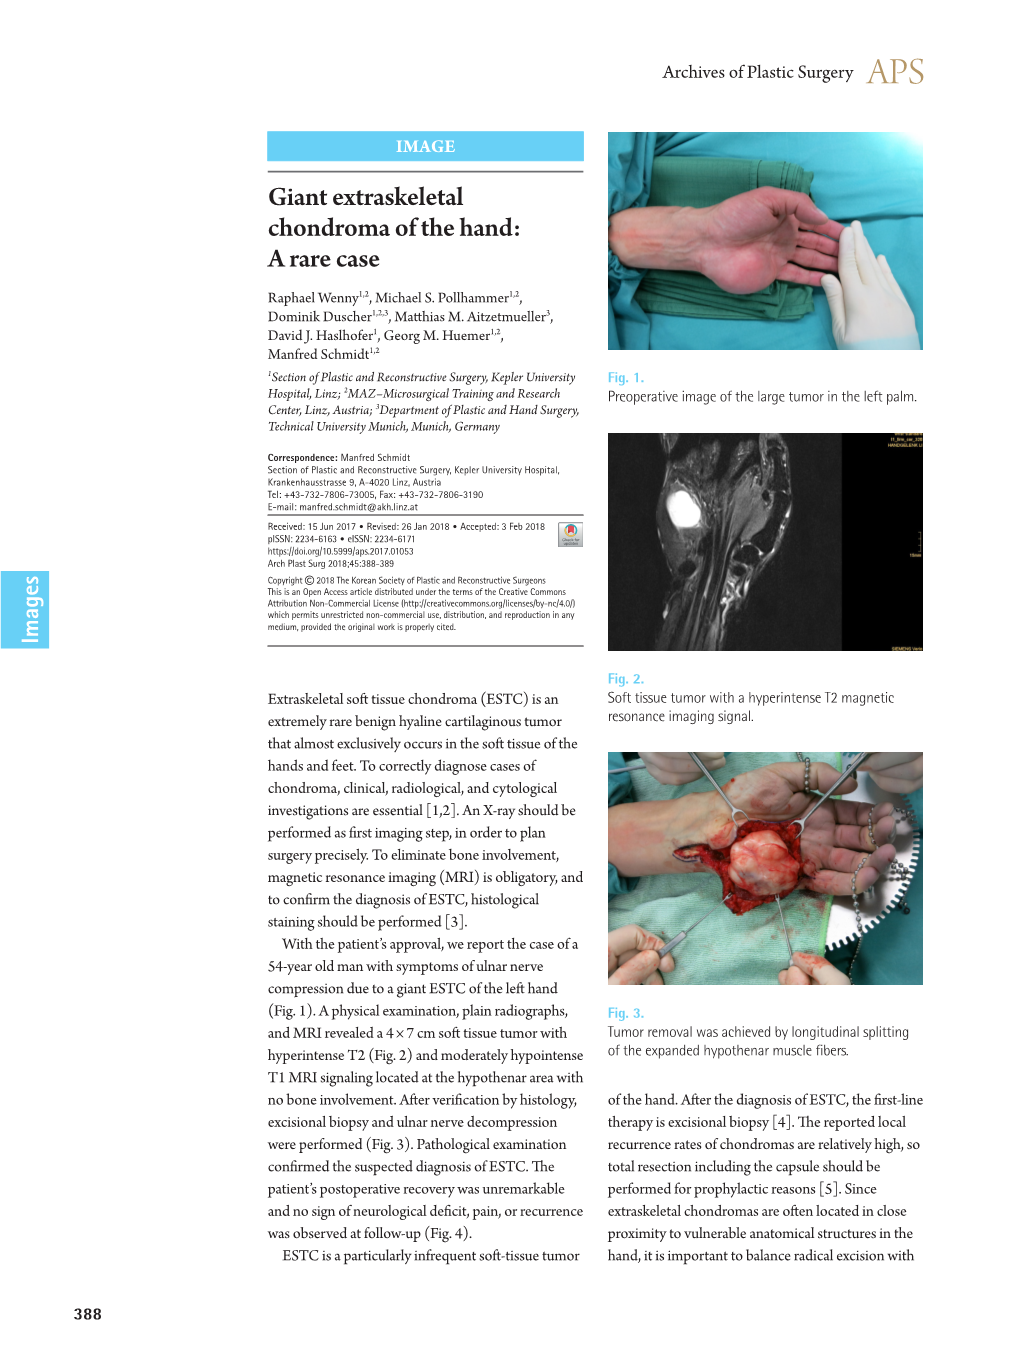 Giant Extraskeletal Chondroma of the Hand: a Rare Case